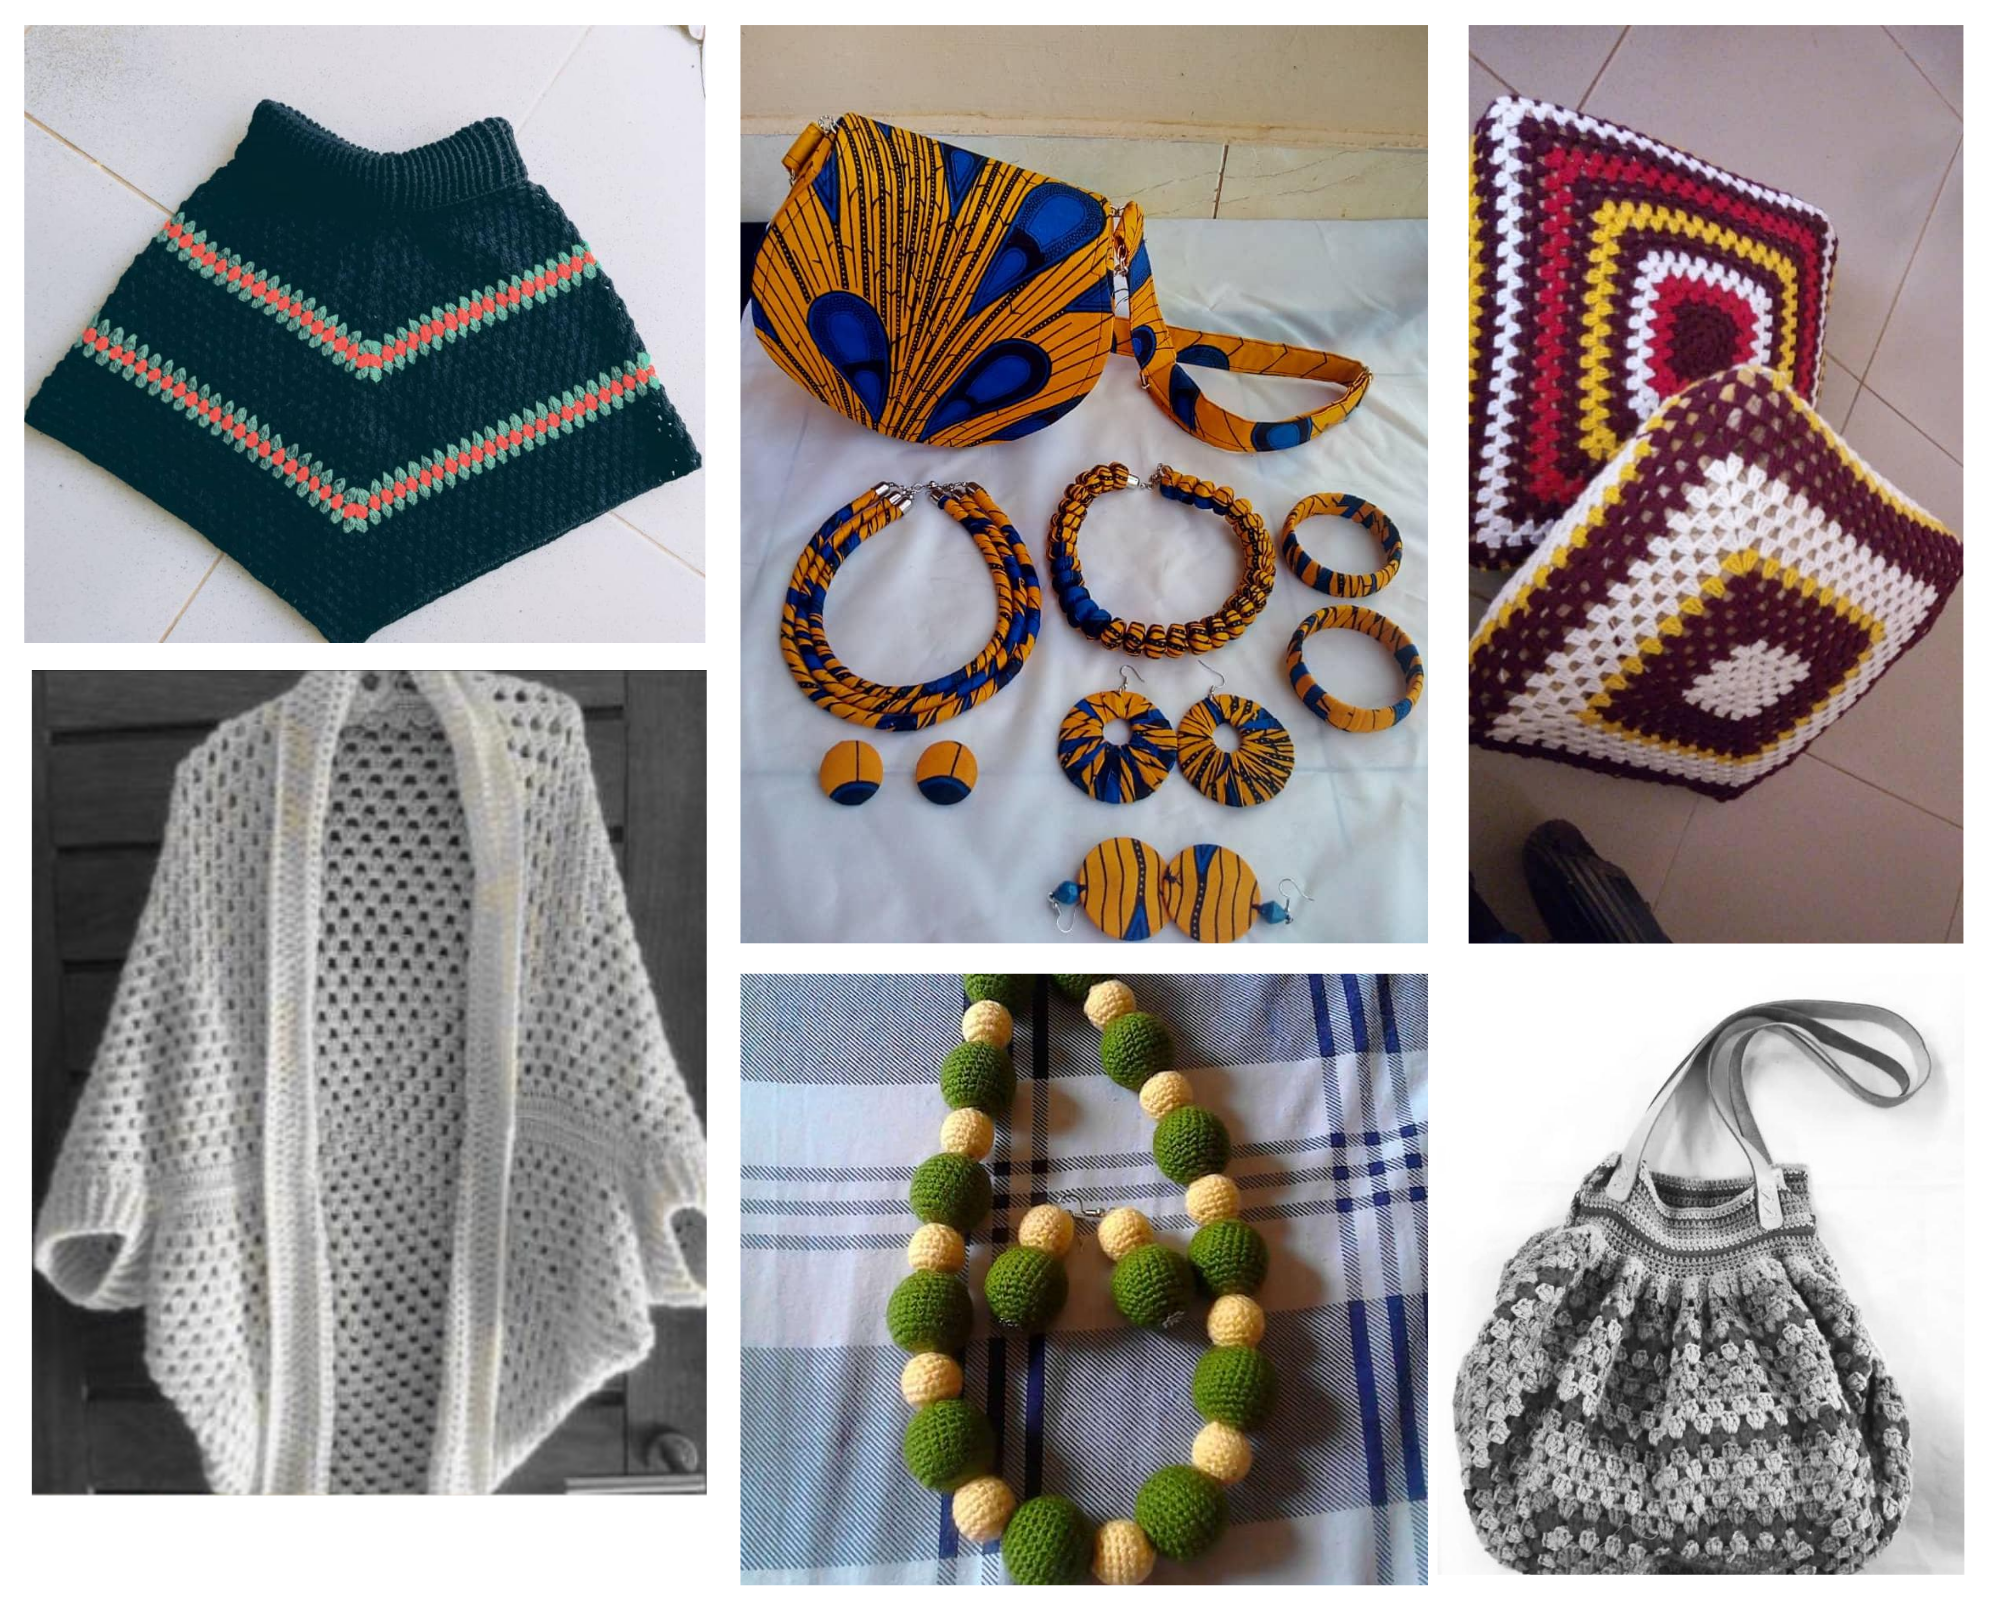 IMage shows bags, sweaters, jewellery and pillow cases